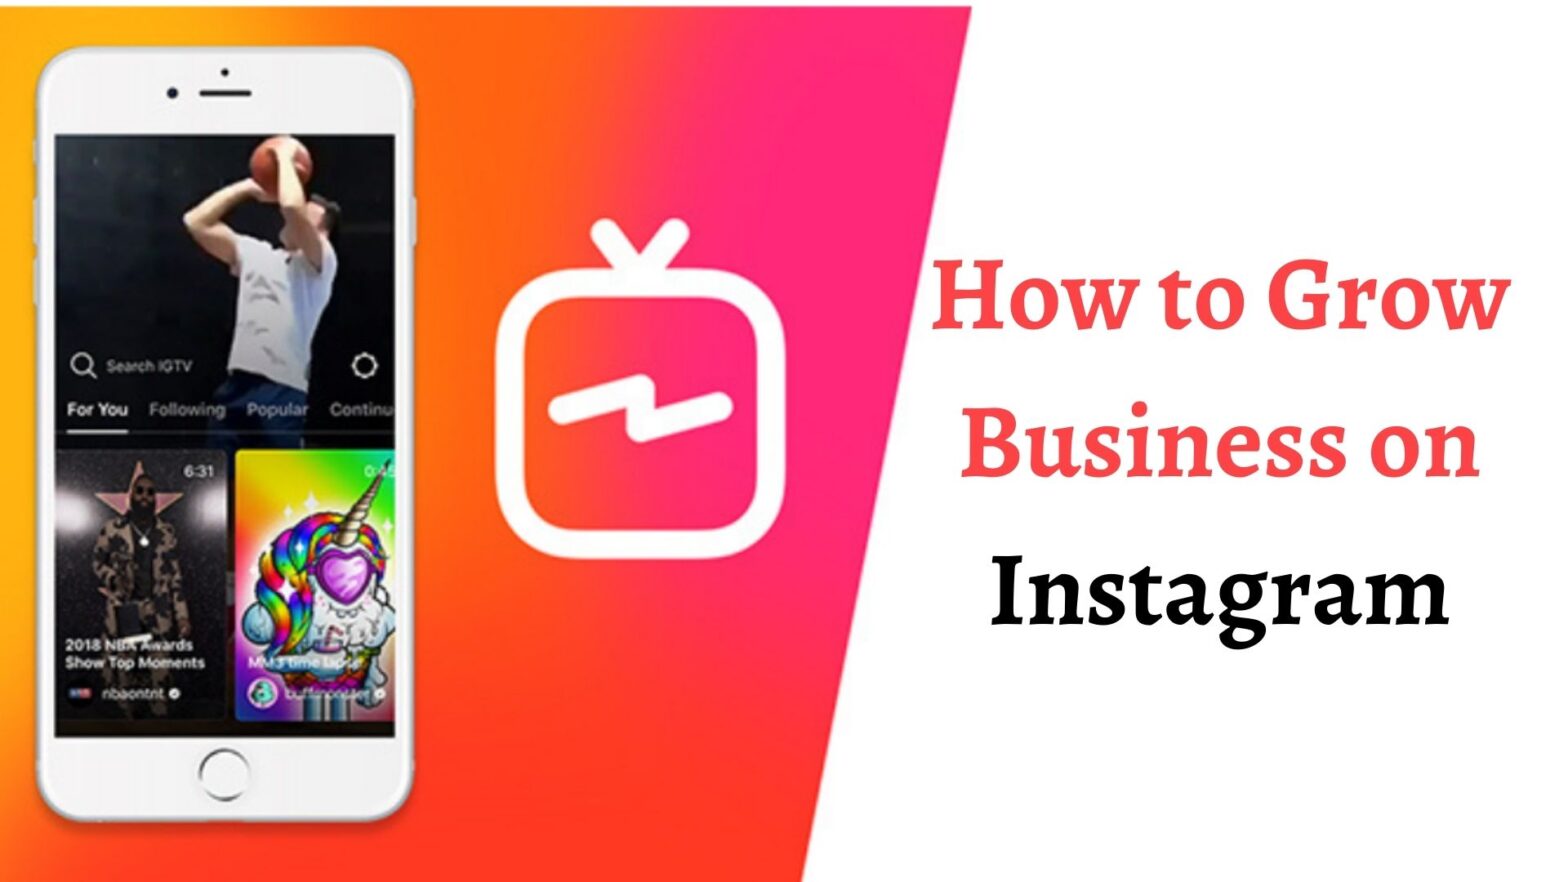 How-to-grow-business-on-instagram-social-cubicle